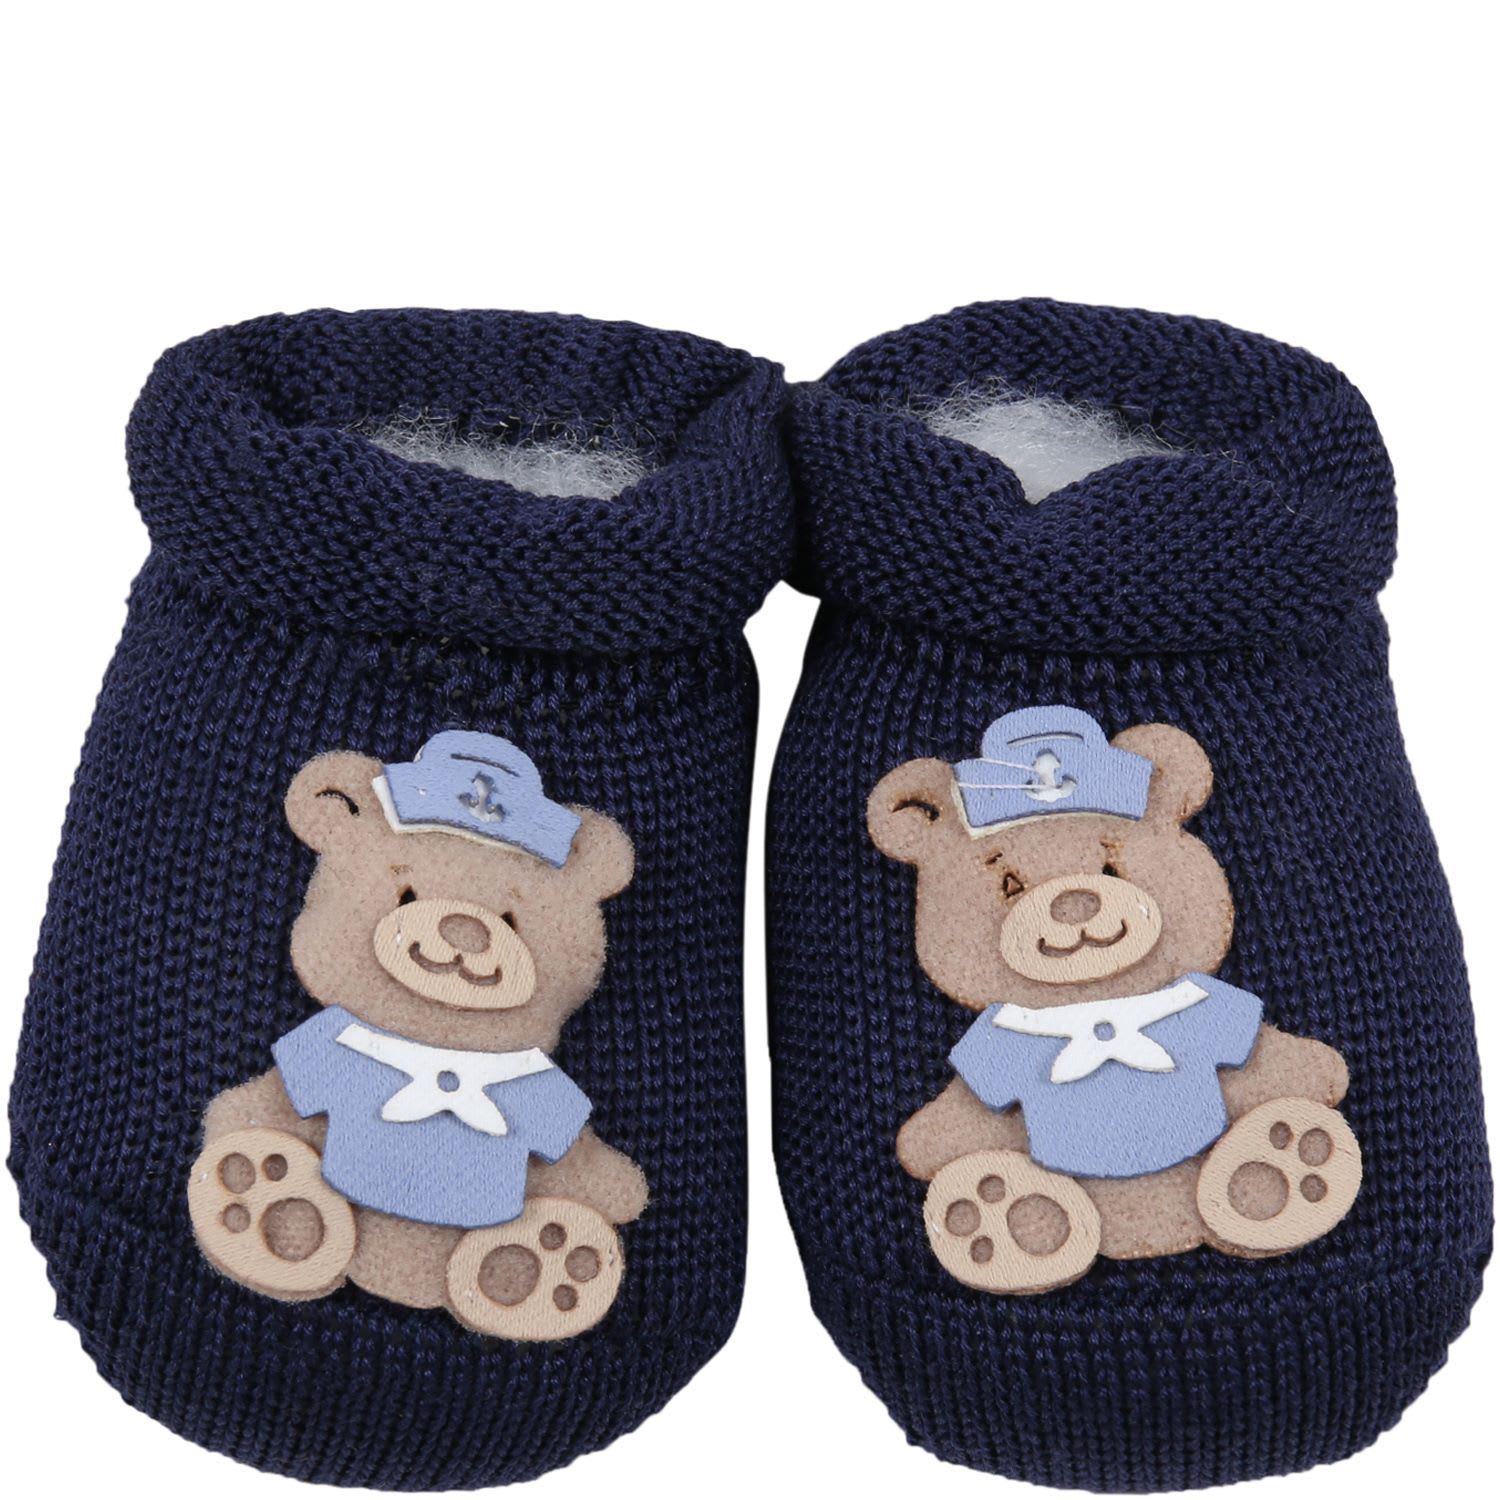 Story loris Blue Slippers For Baby Boy